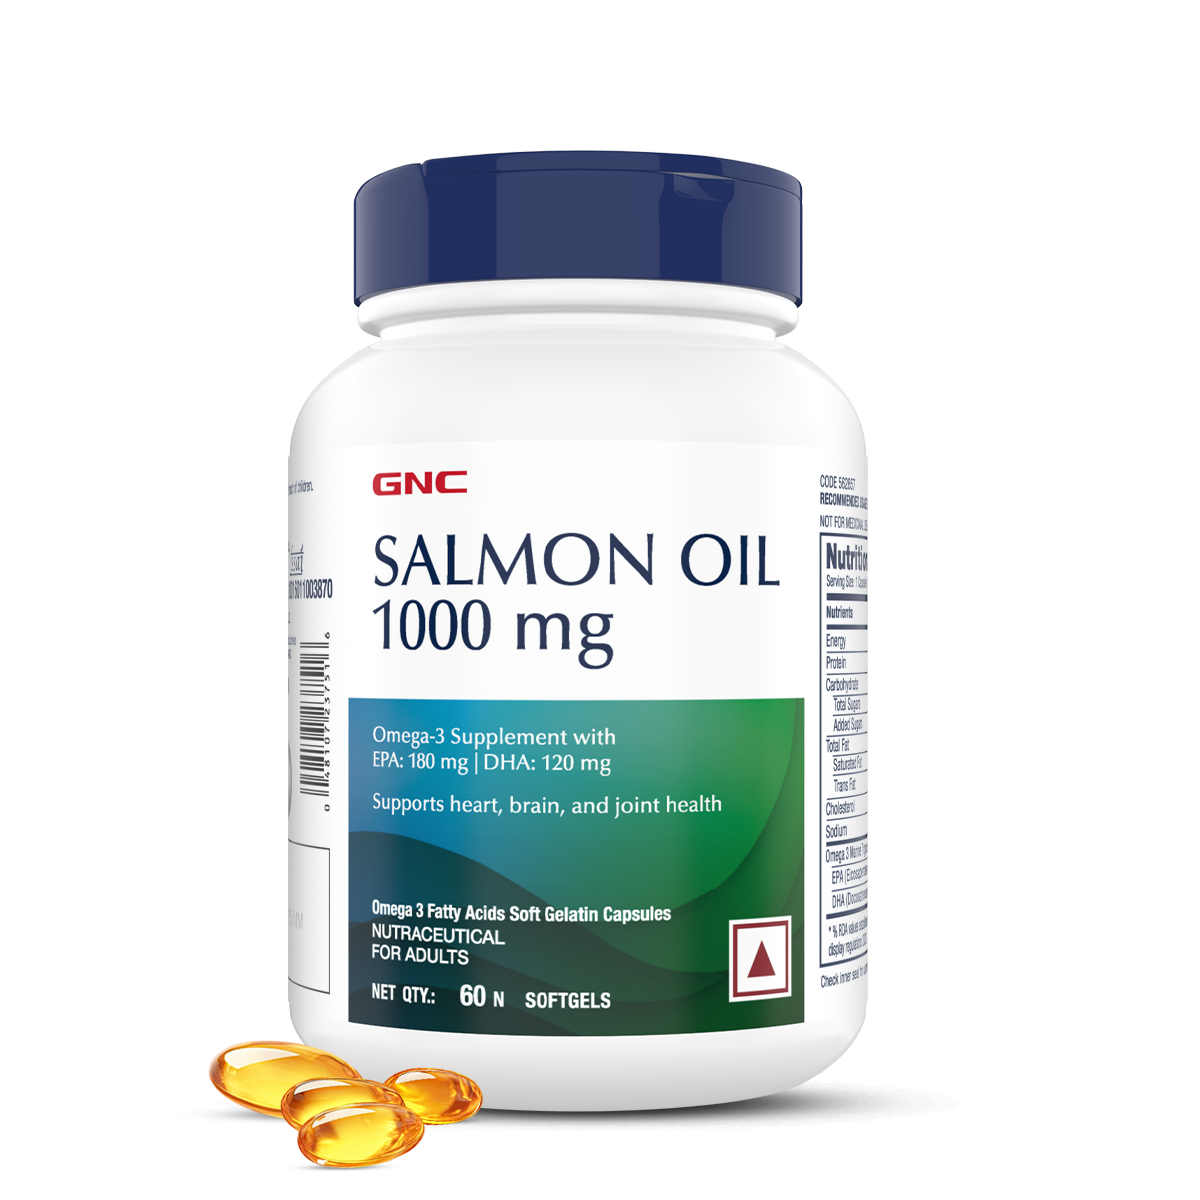 GNC Salmon Oil 1000mg - Supports Joint Health, Vision & Overall Well-Being